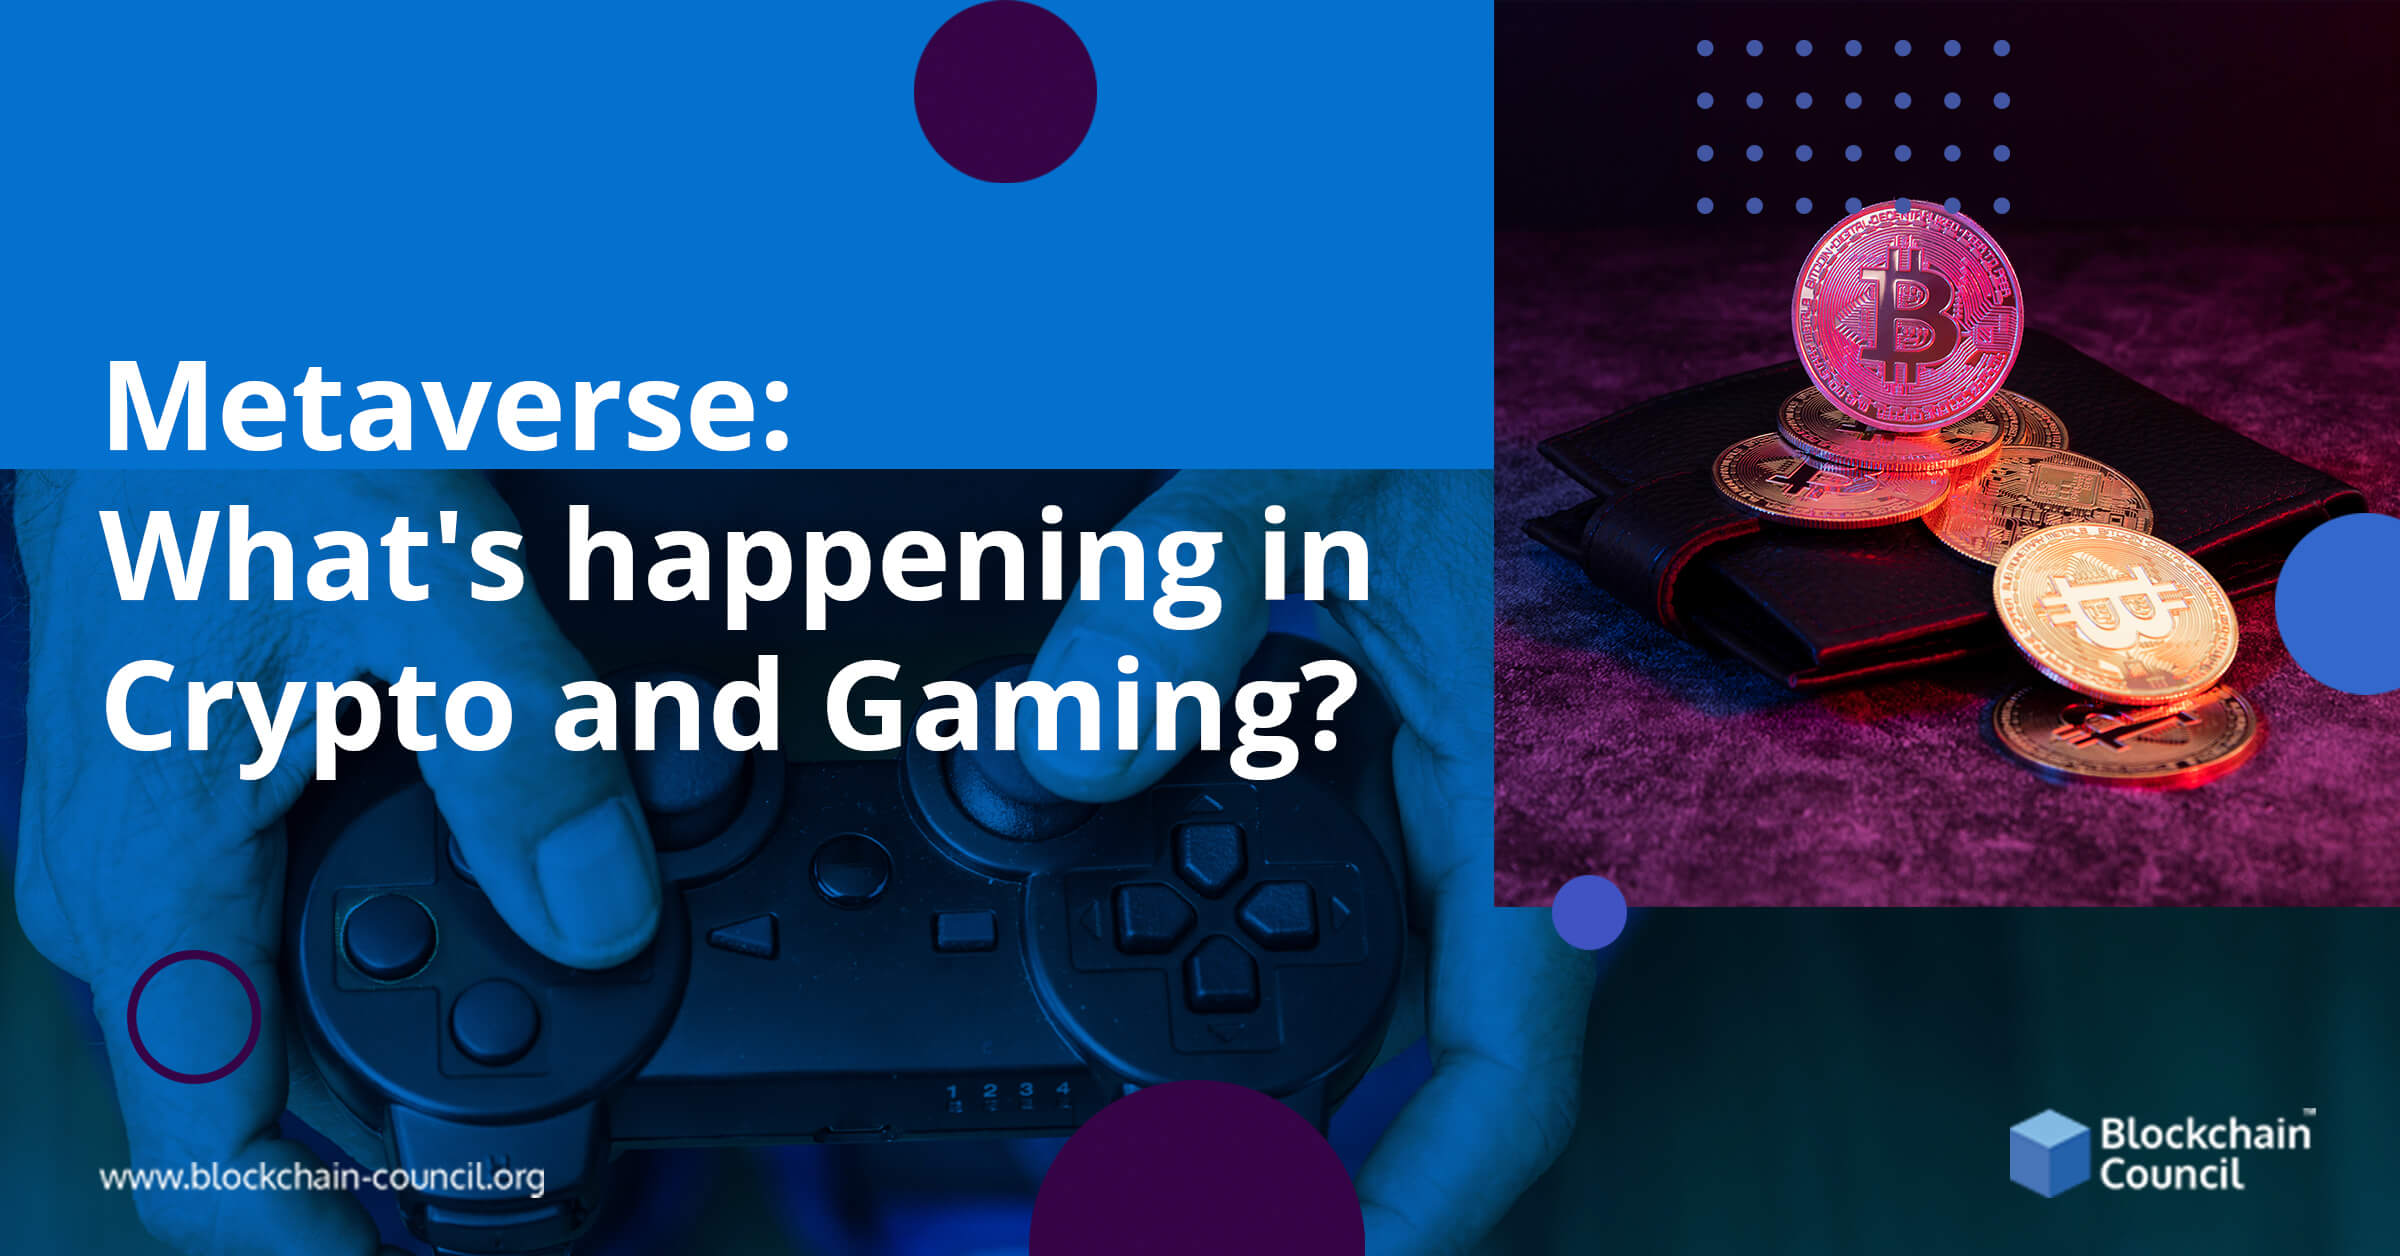 Metaverse: What’s happening in Crypto and Gaming?